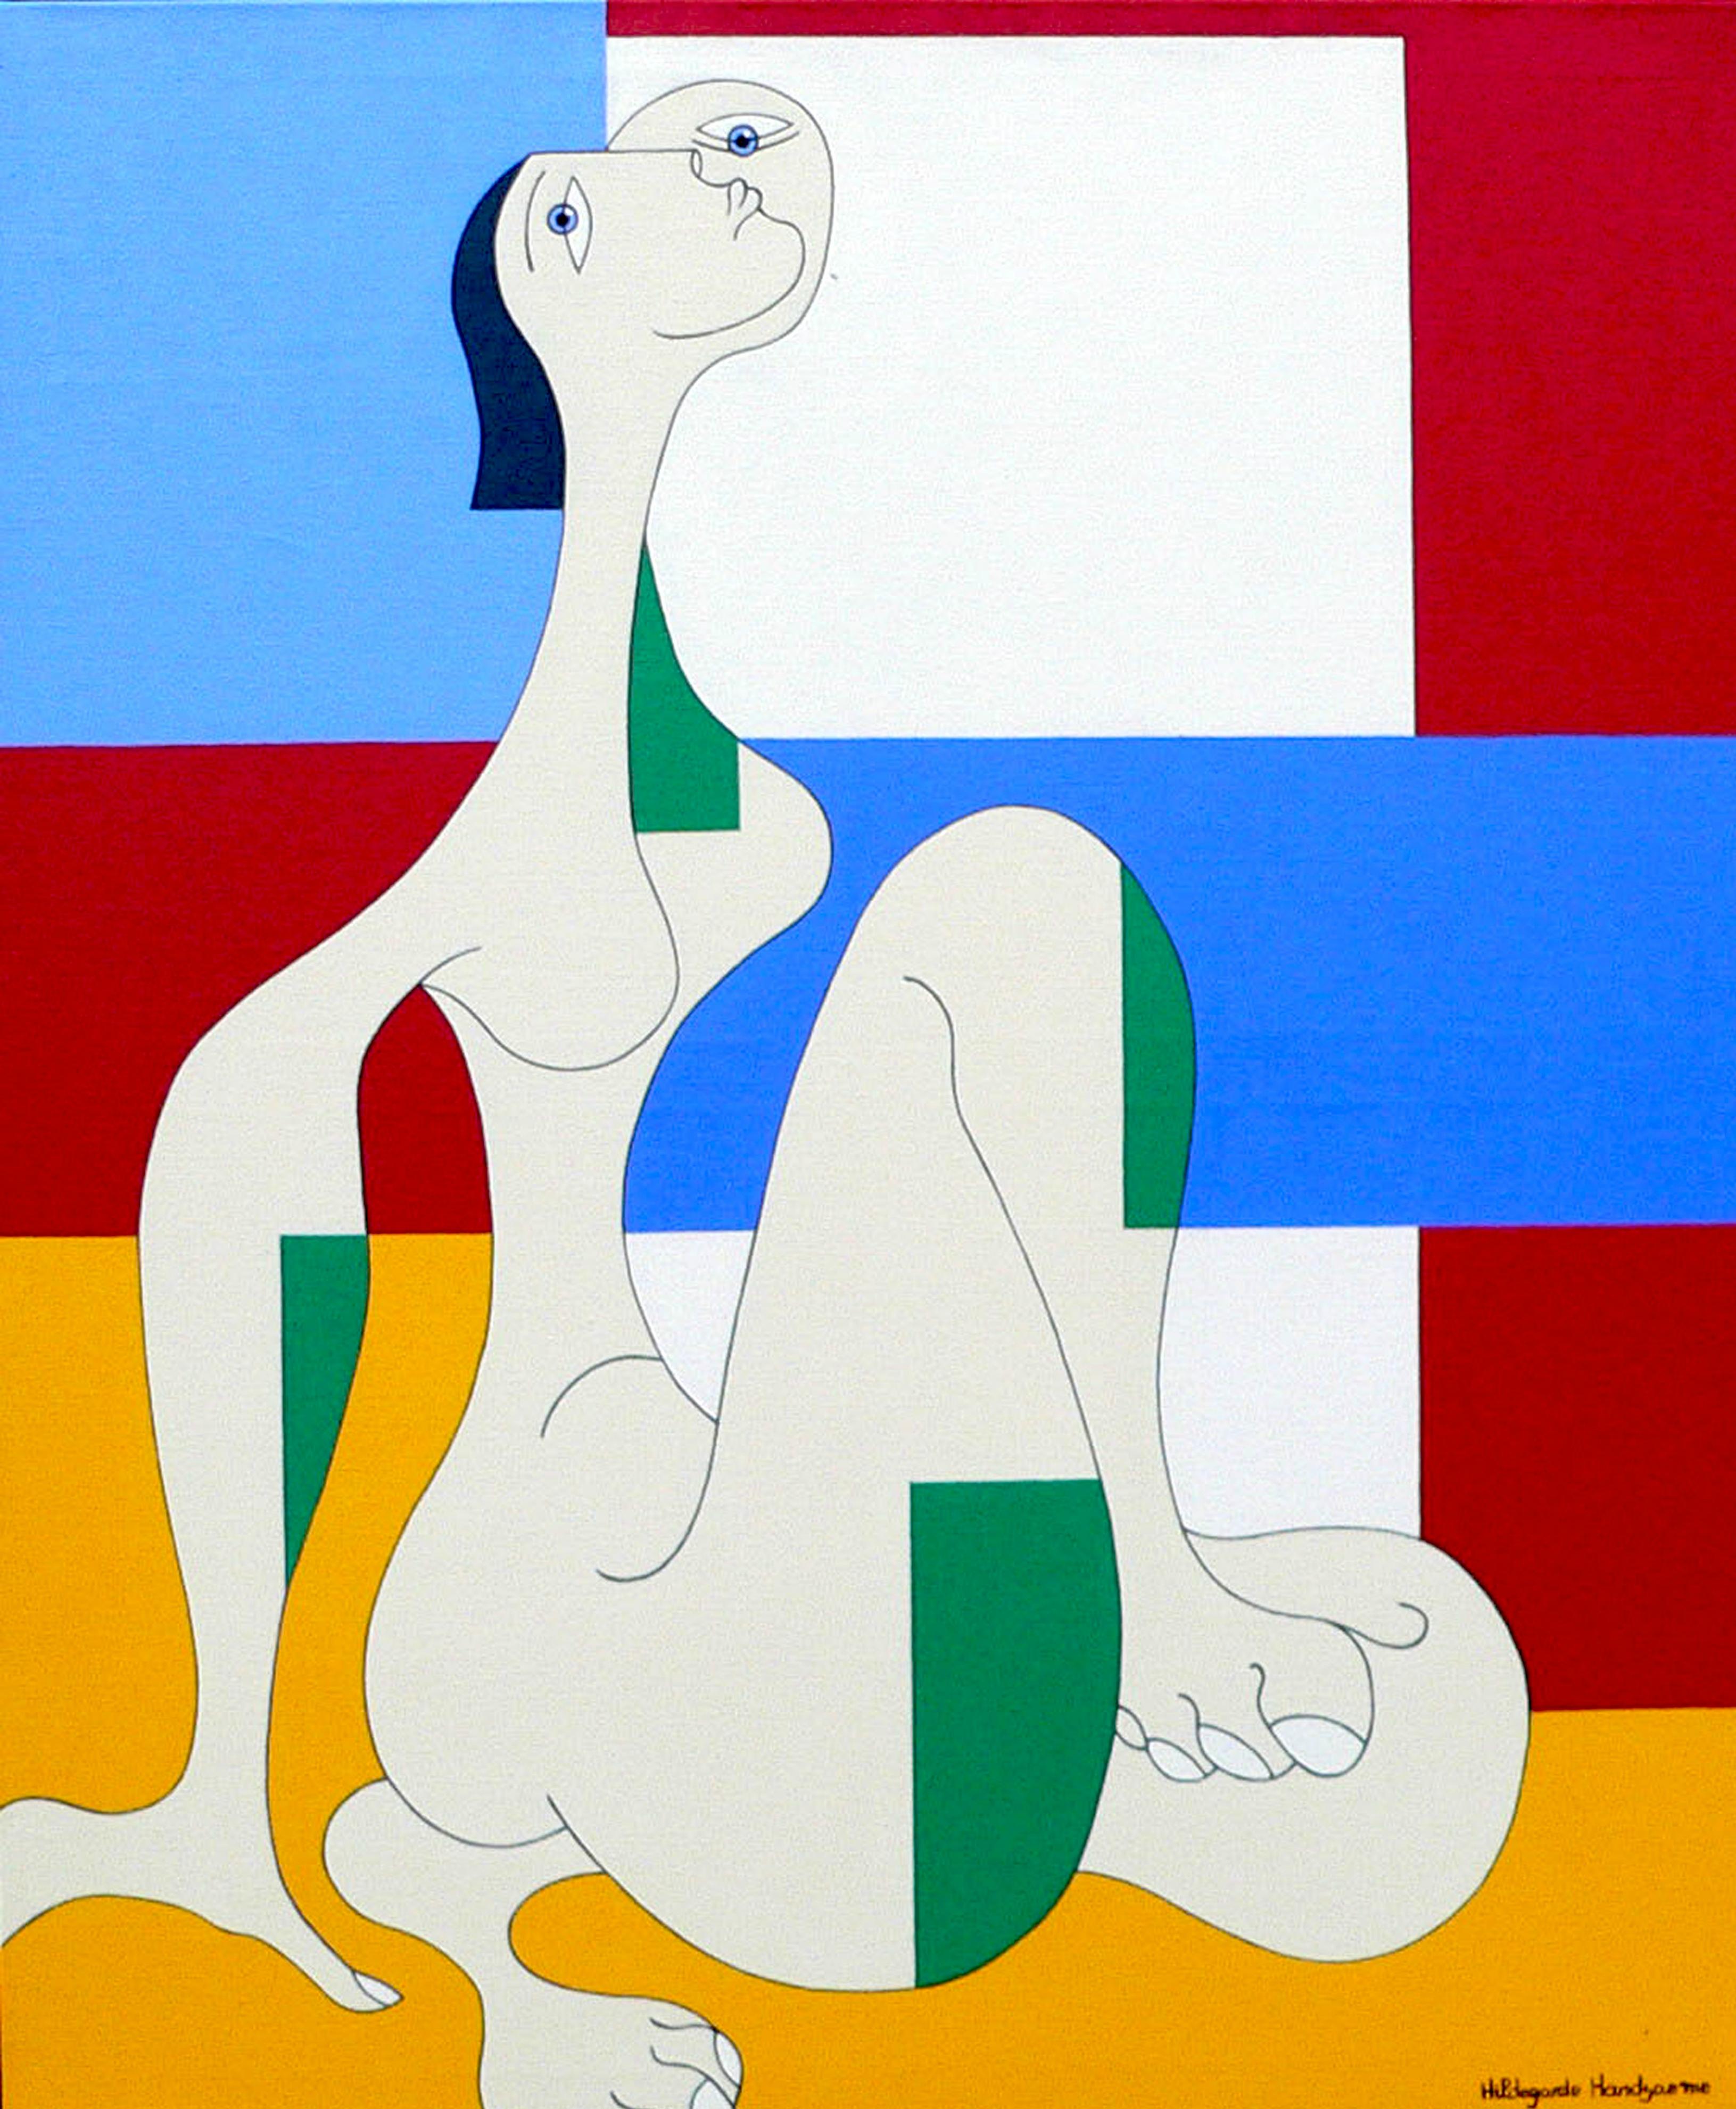 Hildegarde Handsaeme Abstract Painting - Message d'Espoir, Modern Abstract Geometric Painting Portrait Yellow Red Blue